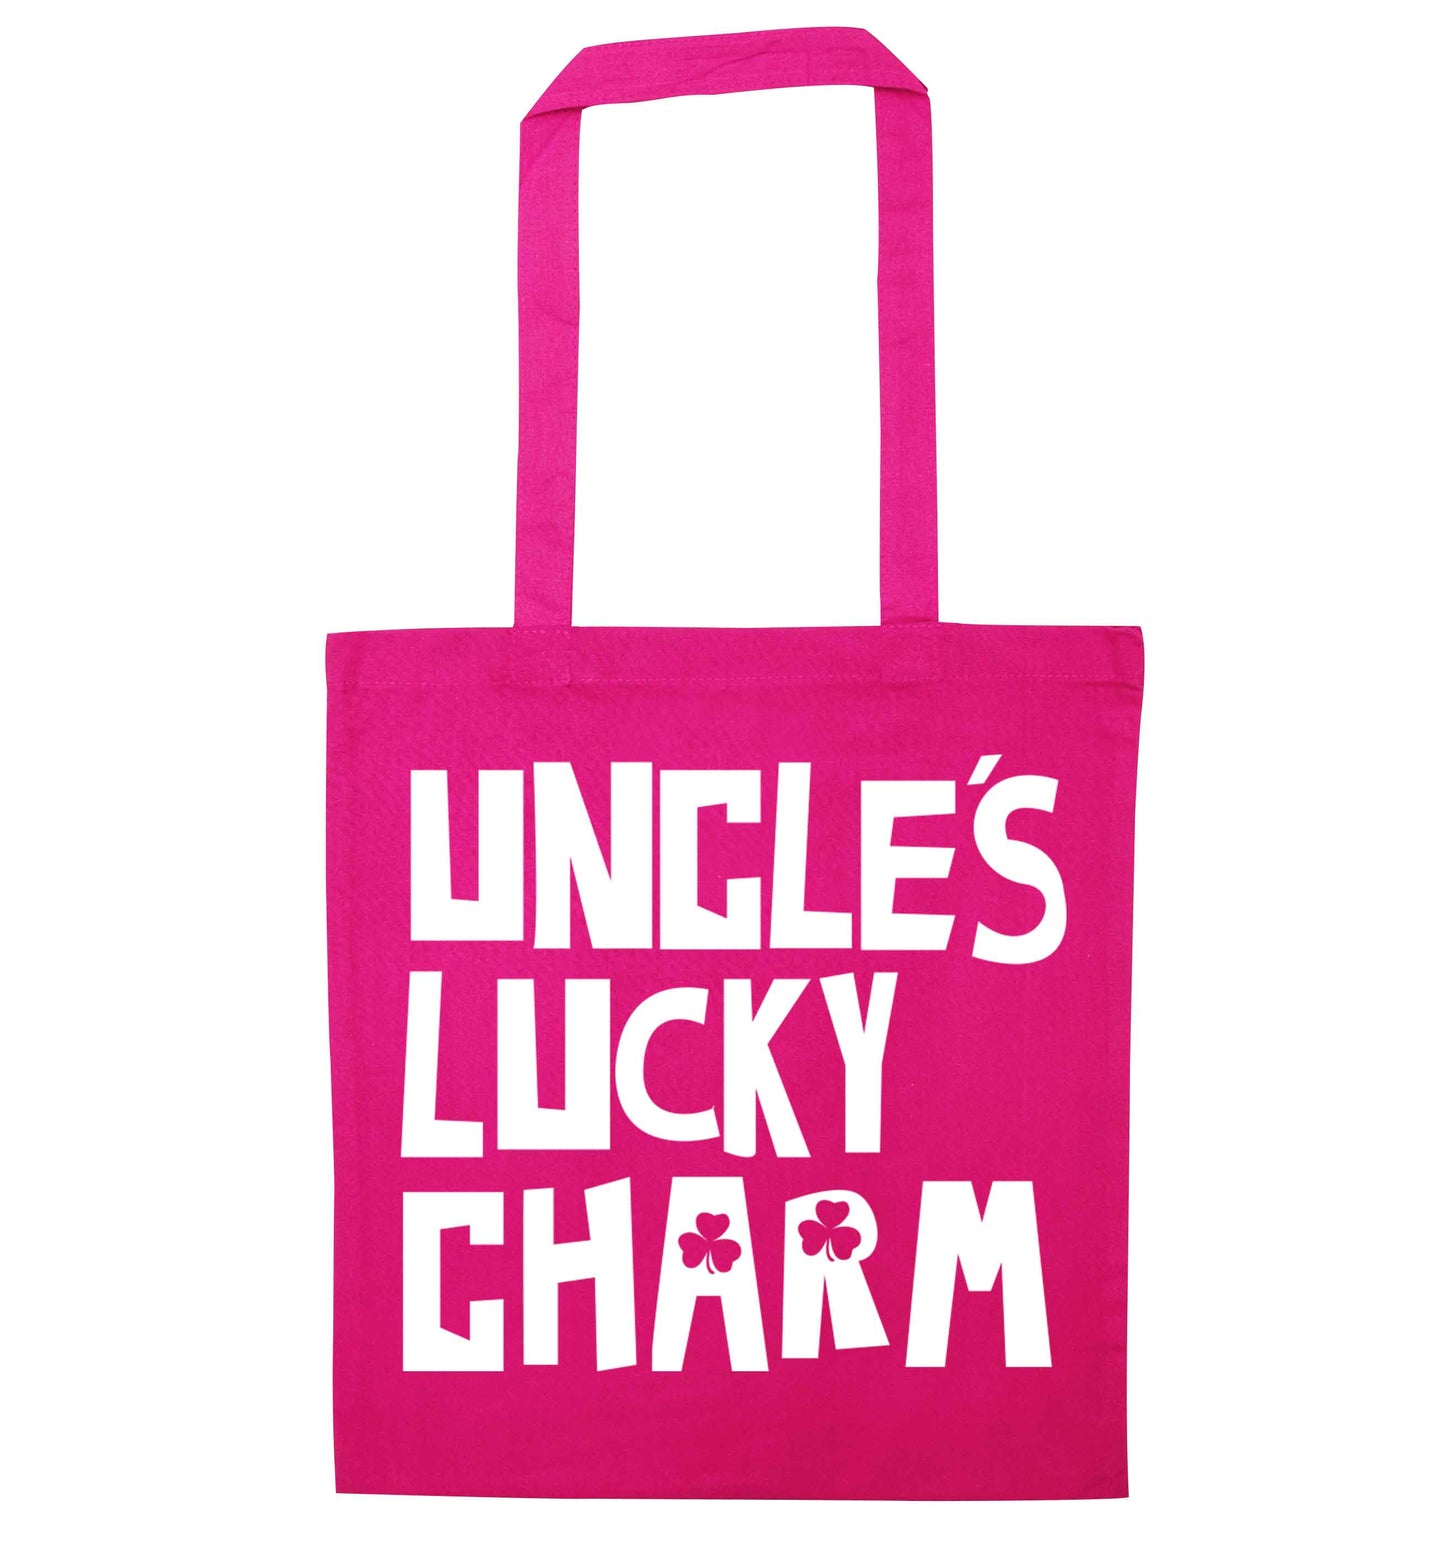 Uncles lucky charm pink tote bag